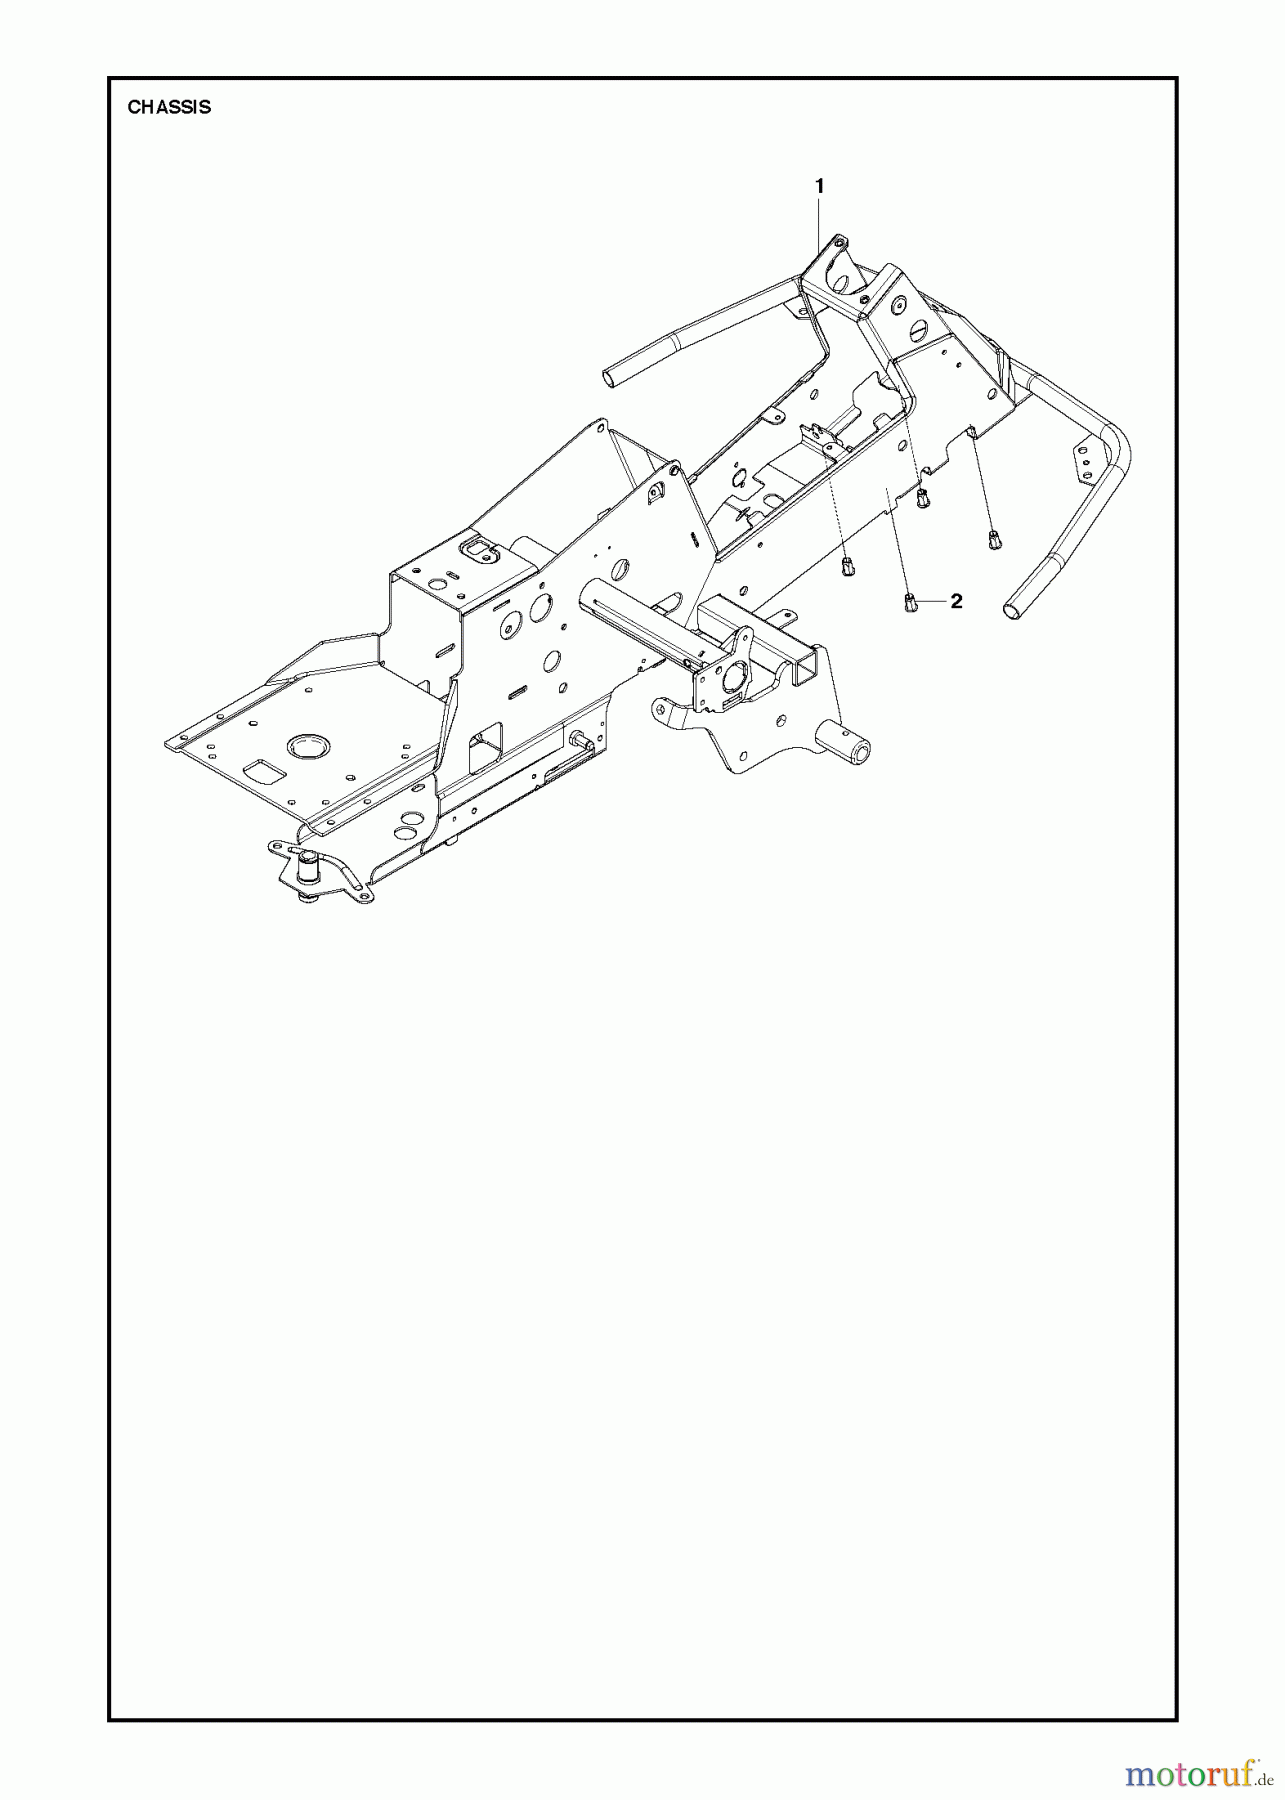  Jonsered Reitermäher FR2213 MA (967178901) - Jonsered Rear-Engine Riding Mower (2013) CHASSIS ENCLOSURES